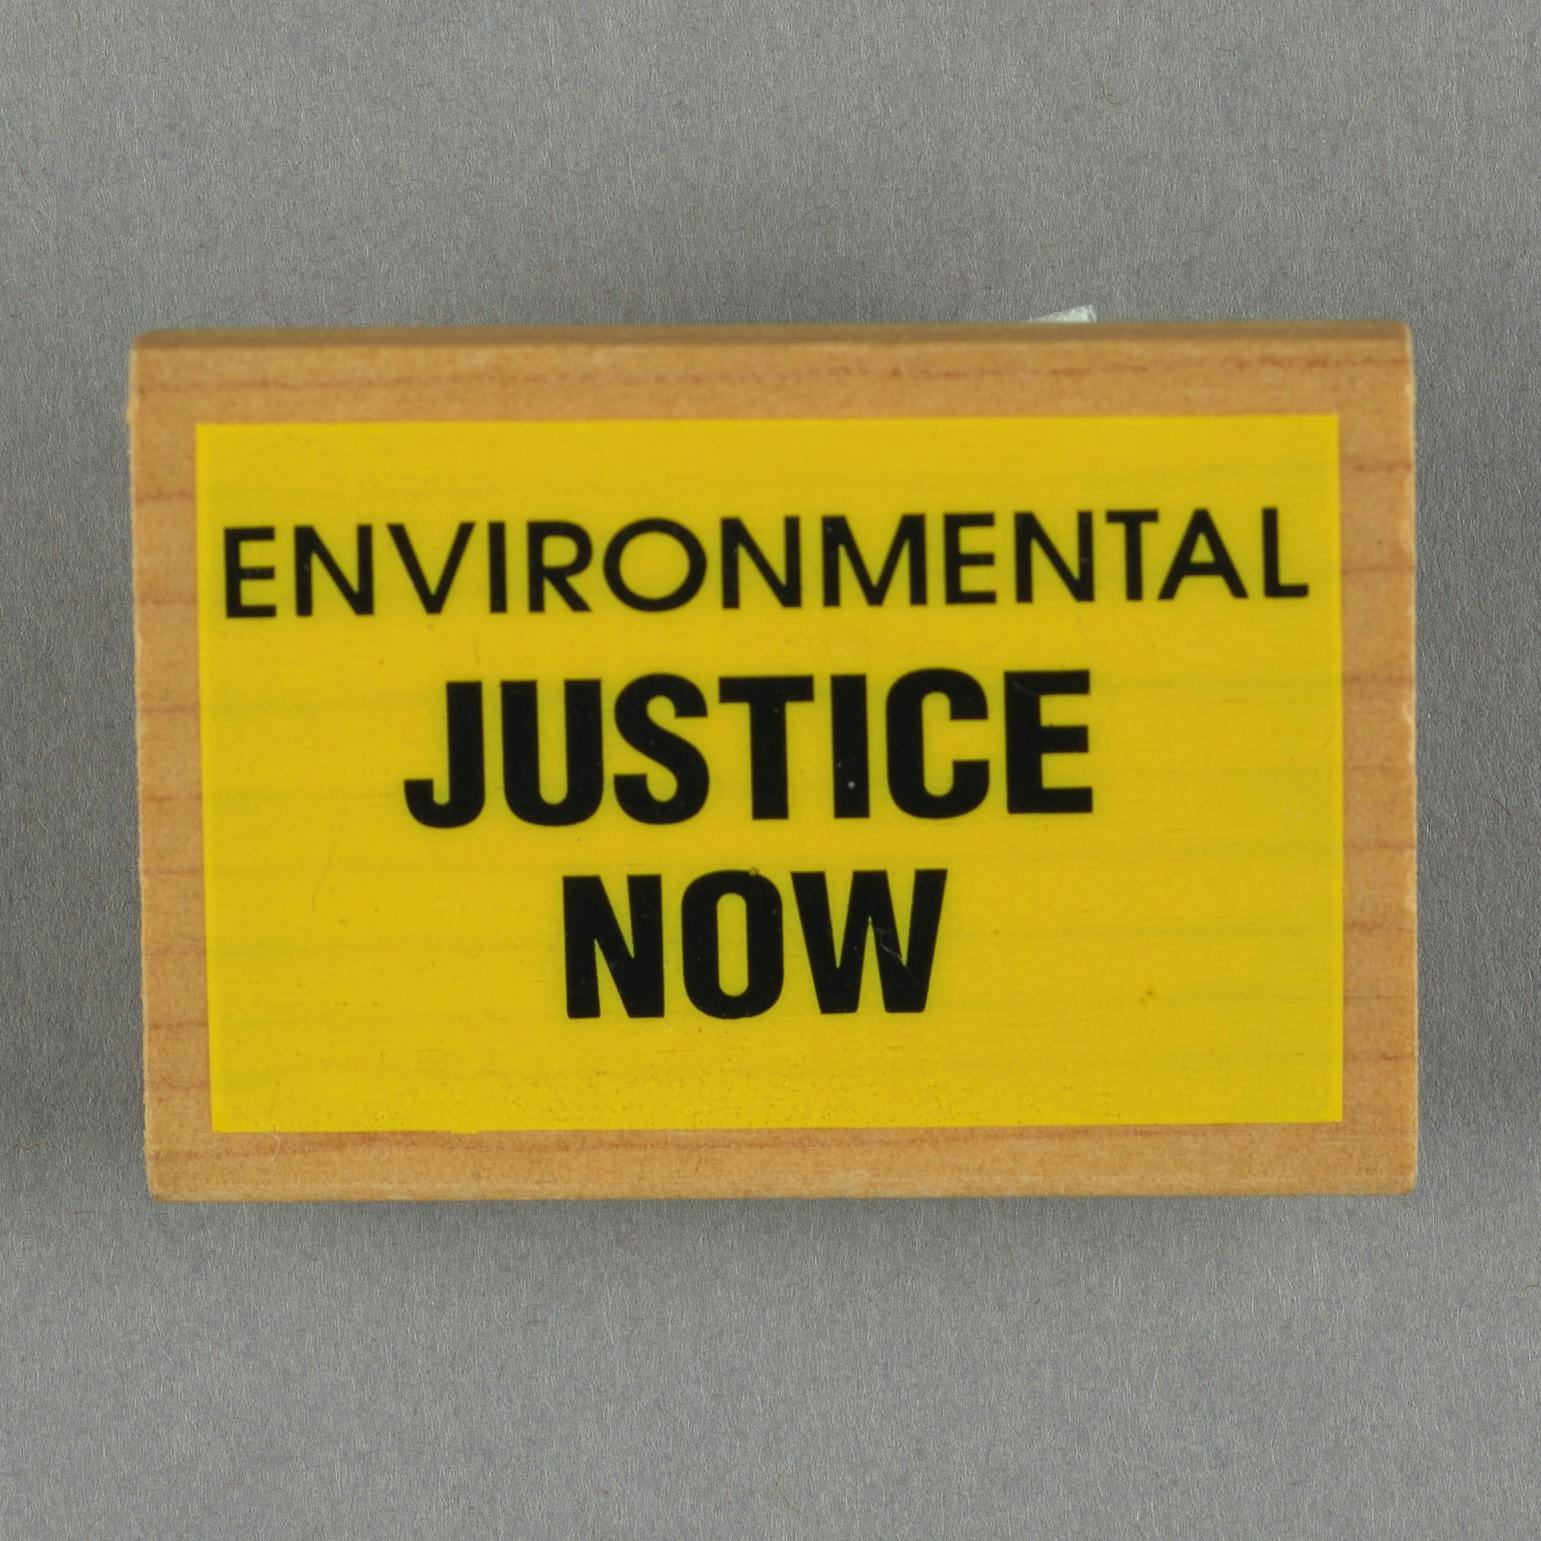 square wooden button with black text on yellow background. Text reads "Environmental Justice Now"